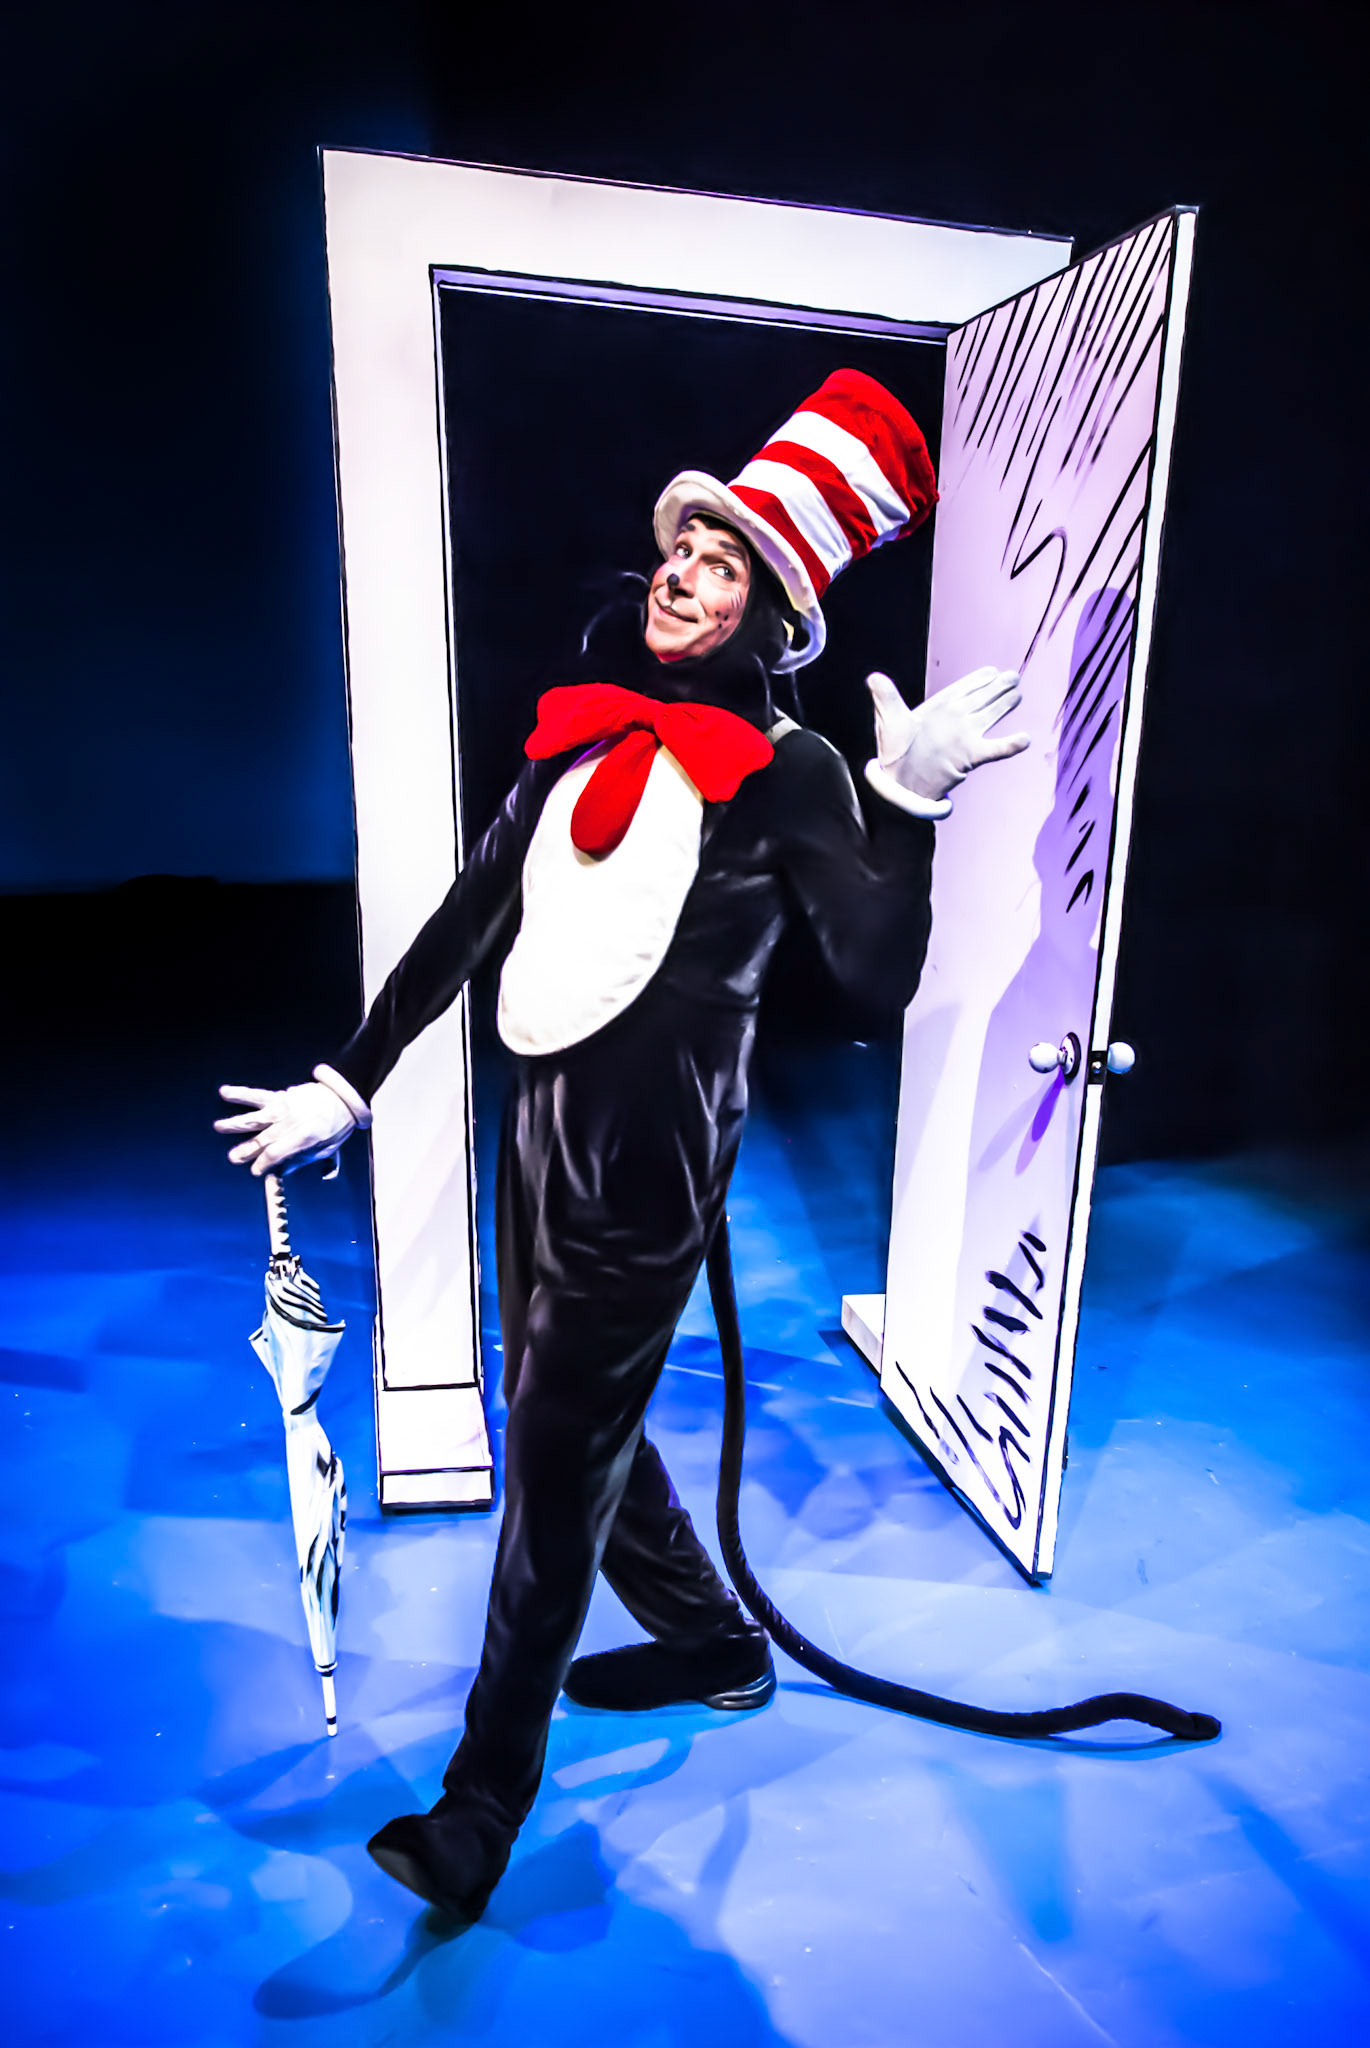 Colin Peterson - The Cat in the Hat